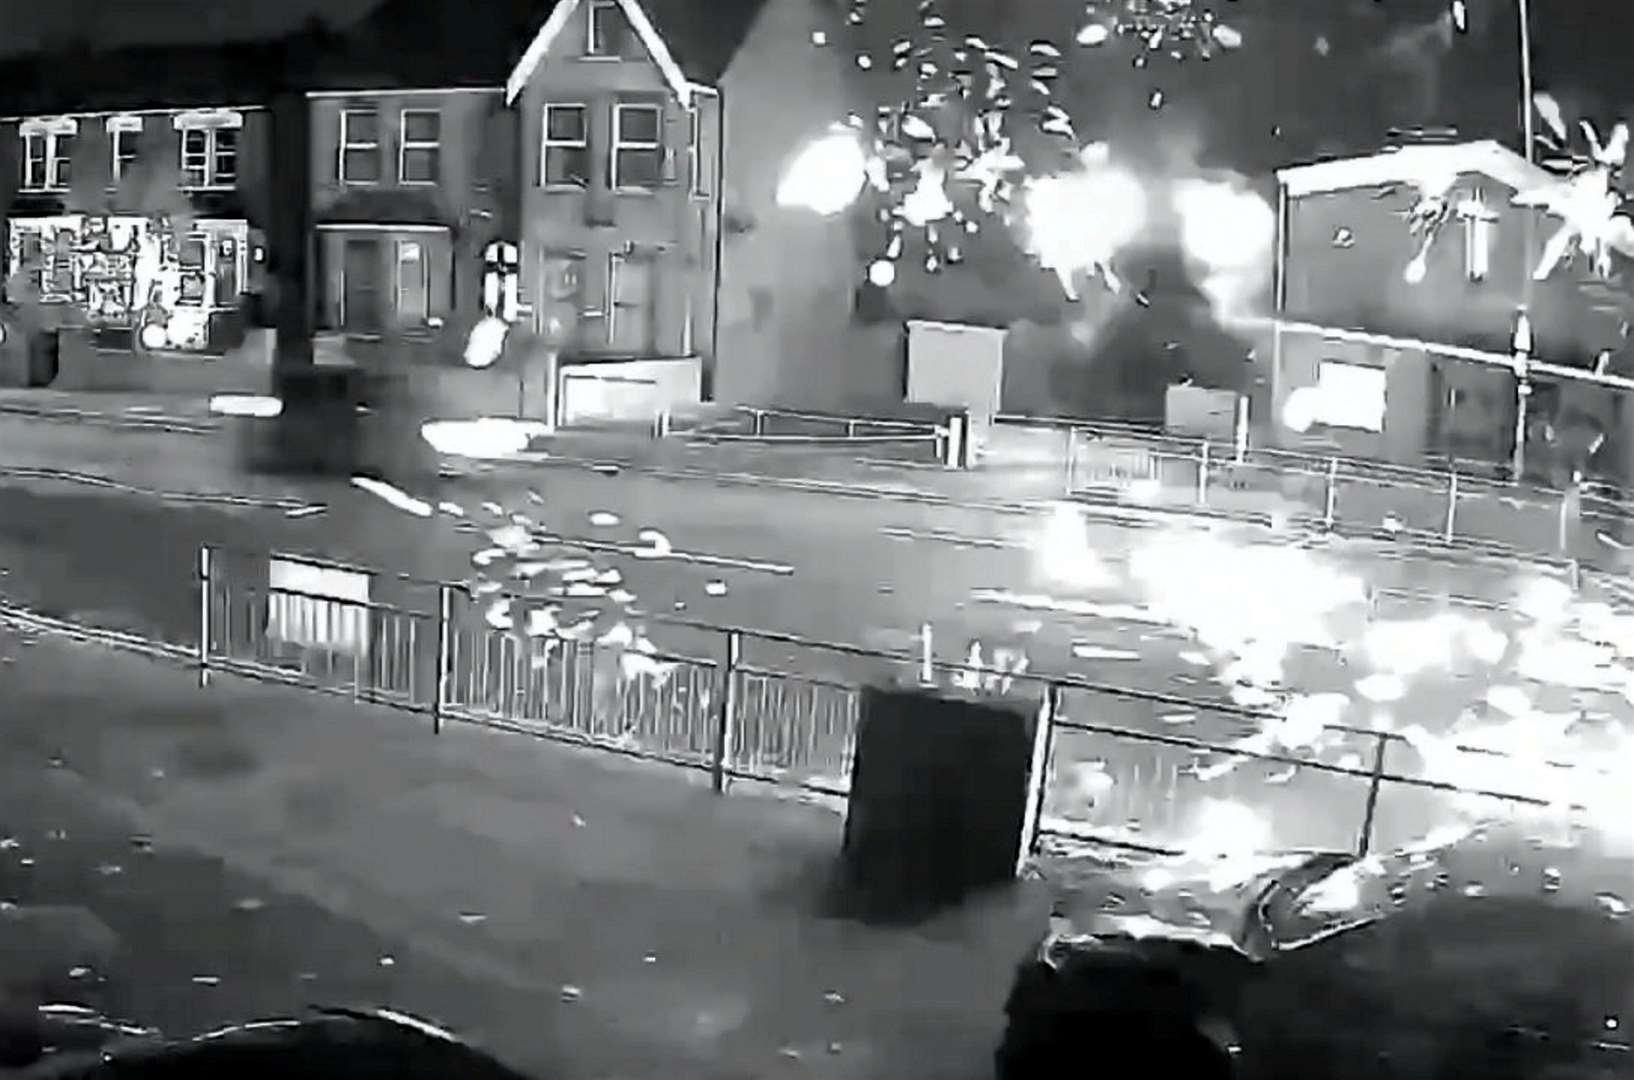 The moment fireworks were launched from a moving car in Dartford